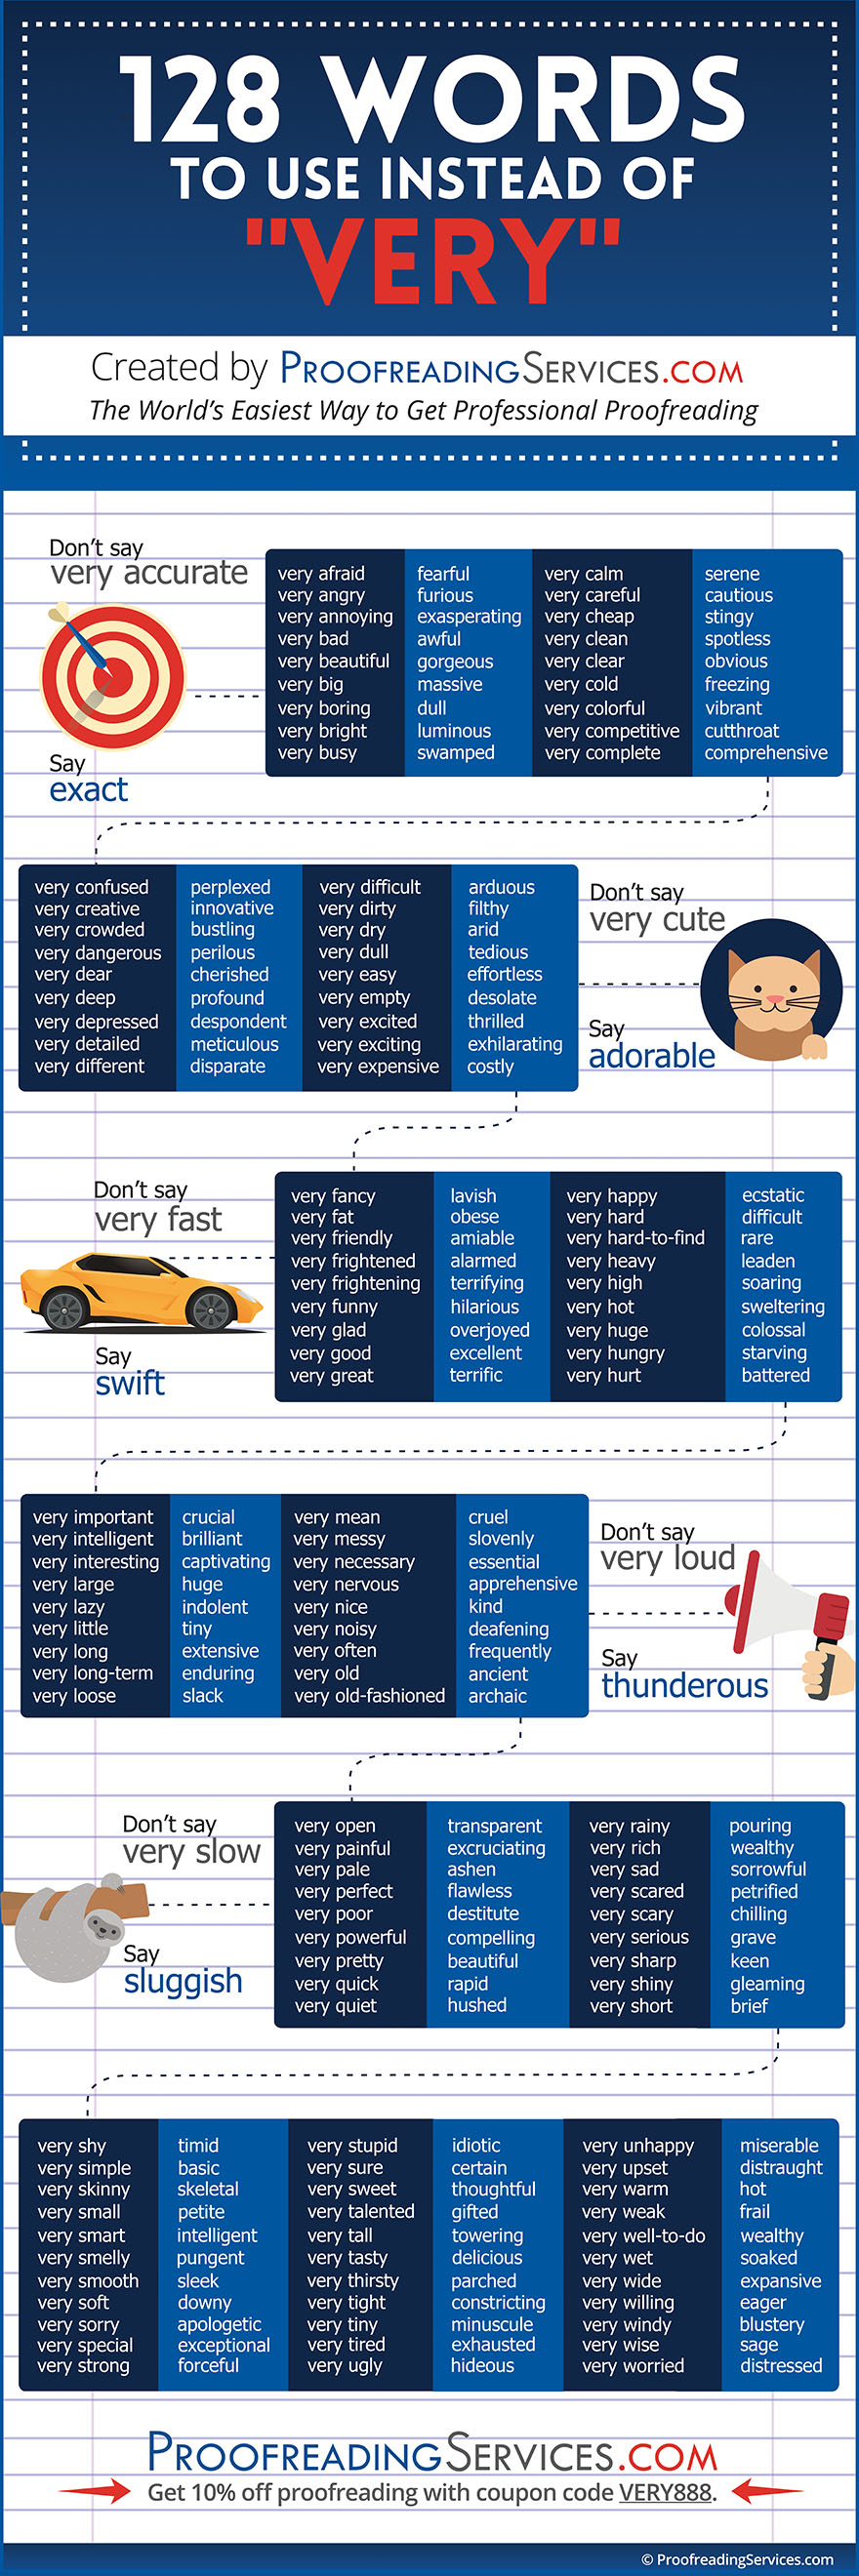 128 Words to Use Instead of "Very" infographic